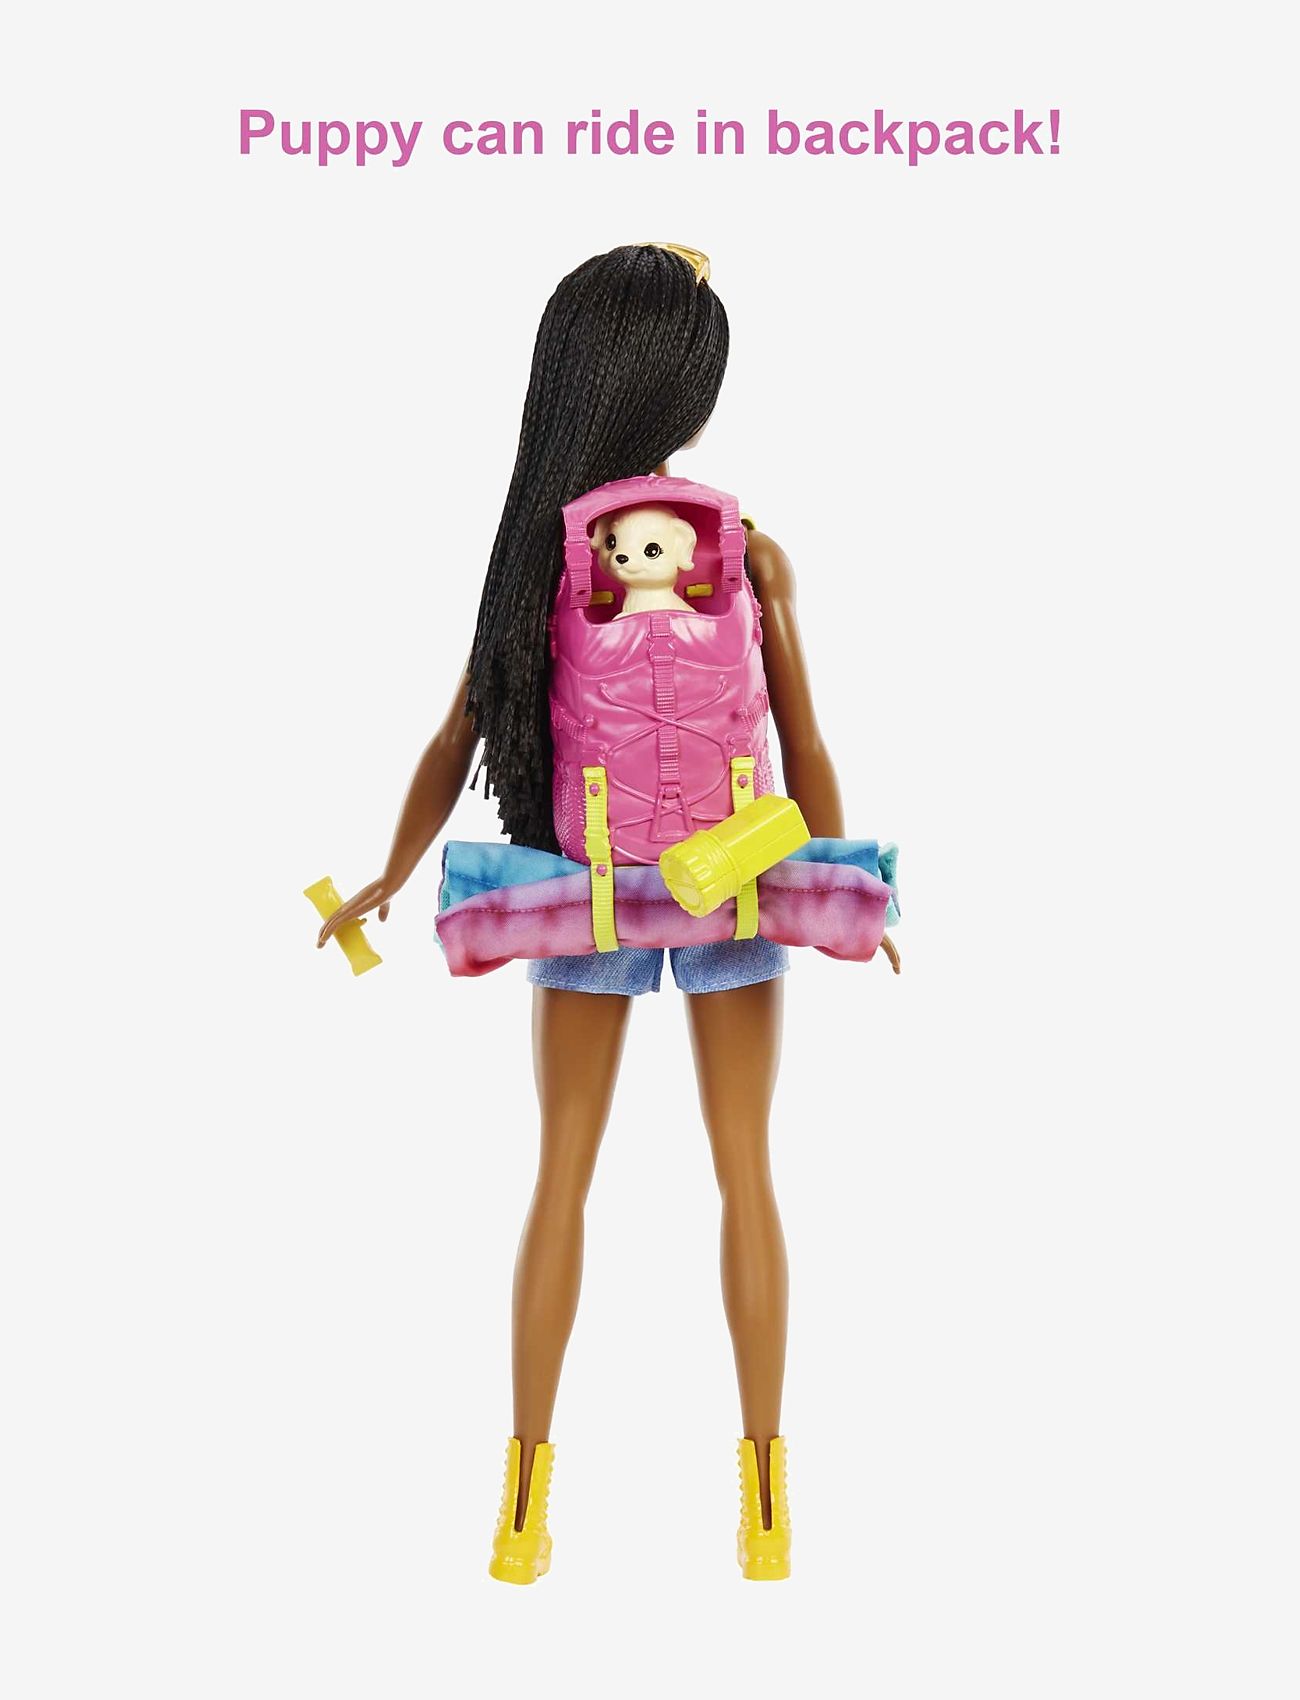 Barbie - Dreamhouse Adventures Doll and Accessories - dukker - multi color - 1